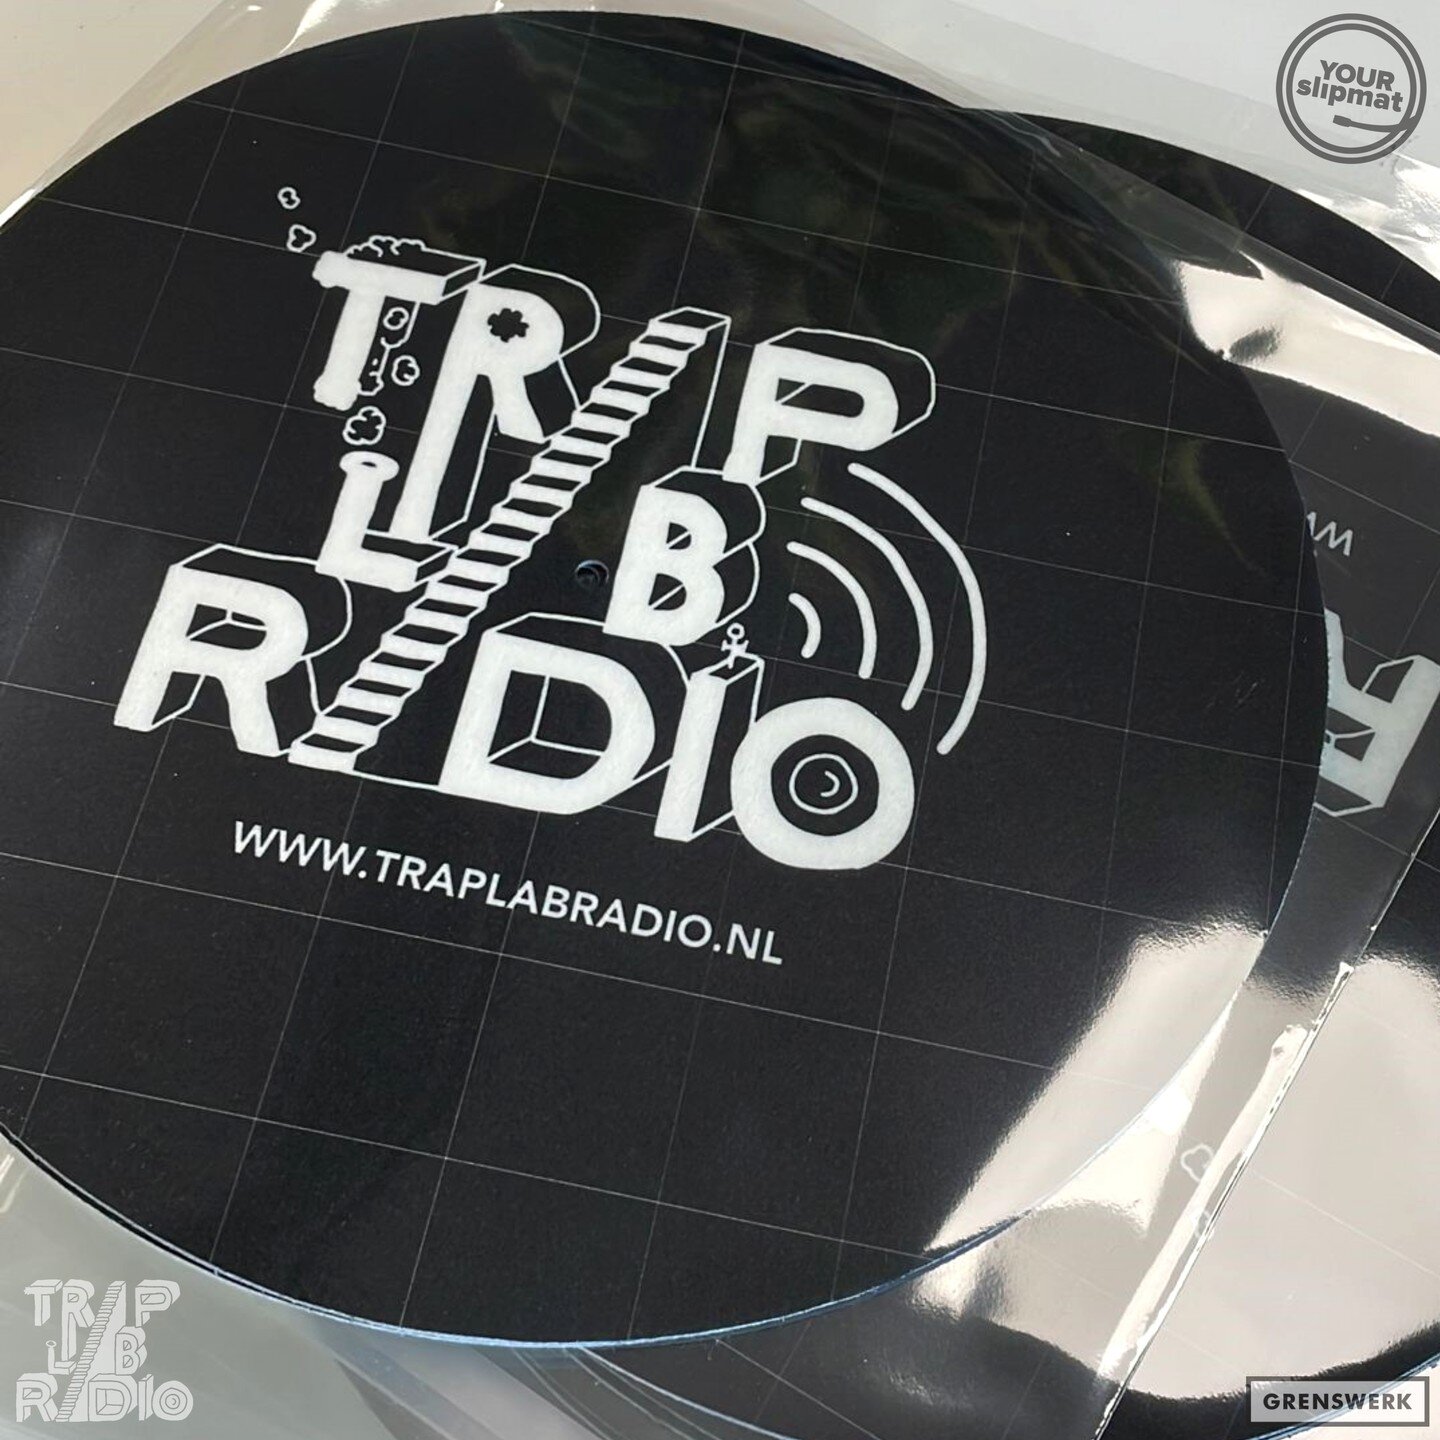 🎅Happy Xmas to @traplabradio &amp; @grenswerk, and thanks for getting this awesome logo on a great batch of 12&quot; all-round 2,5mm slipmats 🎅🌲! #traplabradio #grenswerk #12inchslipmats #customslipmats #feltslipmats #customslipmat #logoslipmat #s